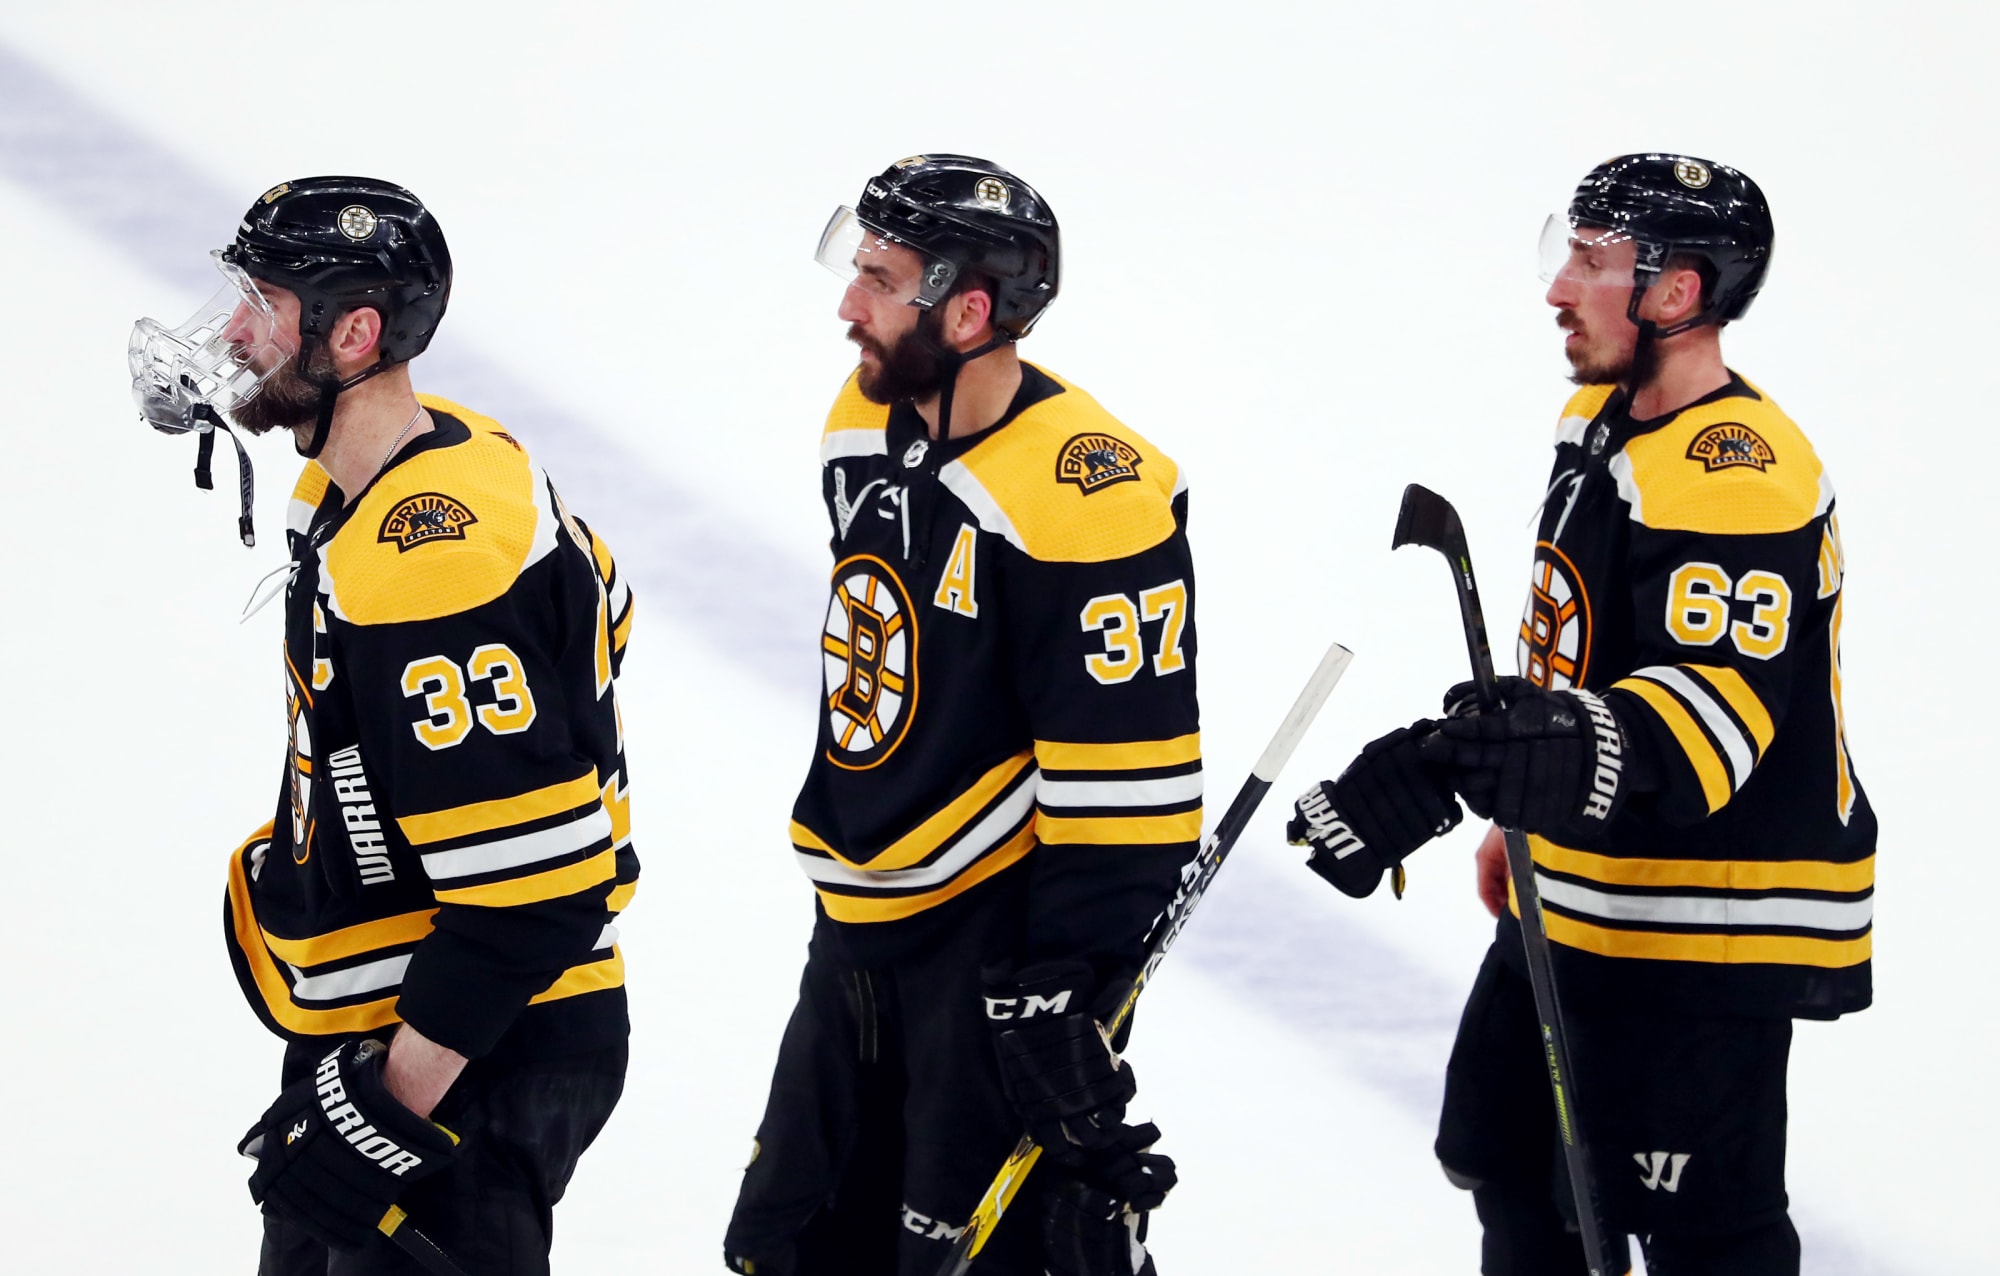 Boston Bruins on X: For the chance to win 2 suite tickets and